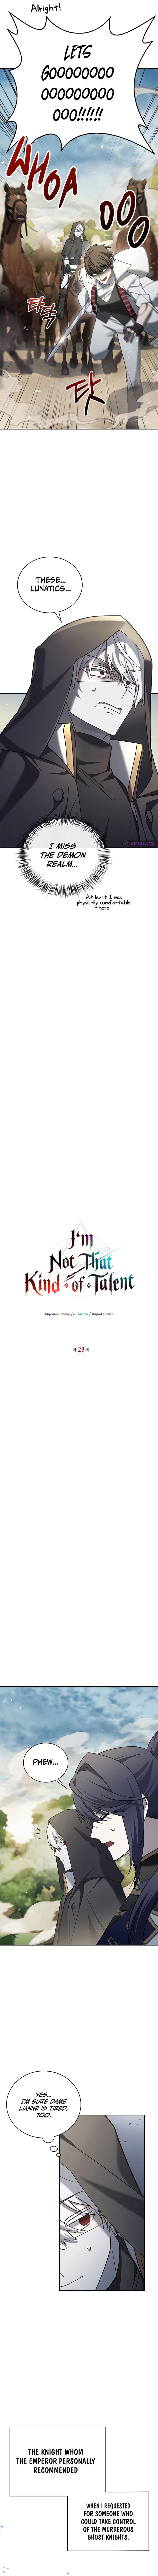 I’m Not That Kind of Talent Chapter 23 page 5